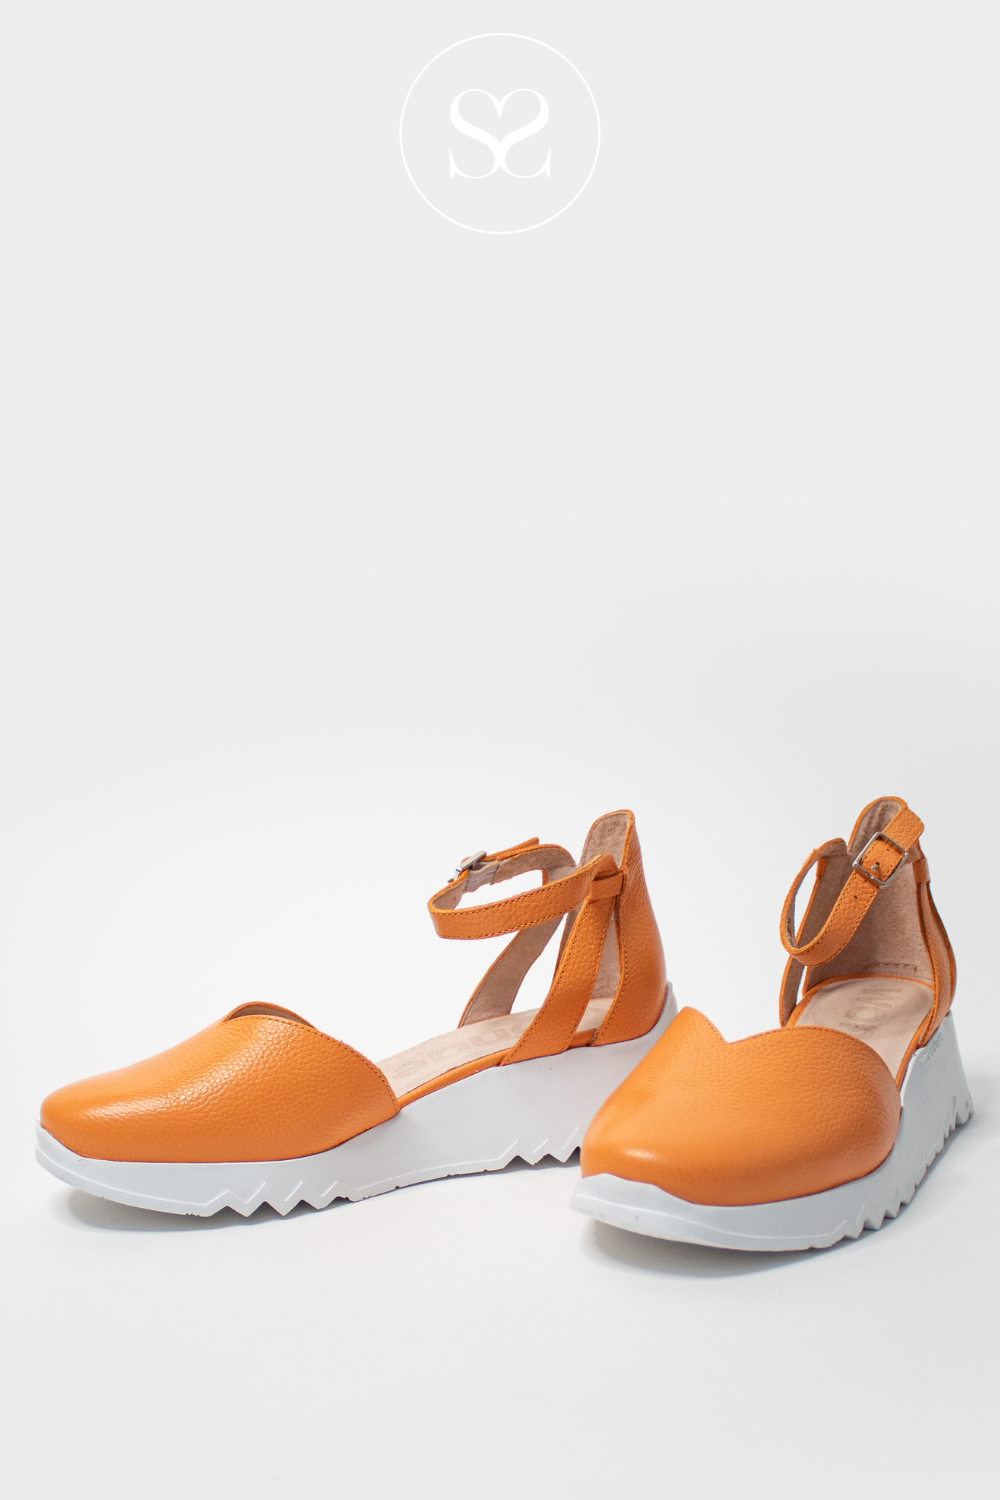 WONDERS E-6703 ORANGE LEATHER CLOSED TOE SANDAL WITH A WEDGE AND ANKLE STRAP